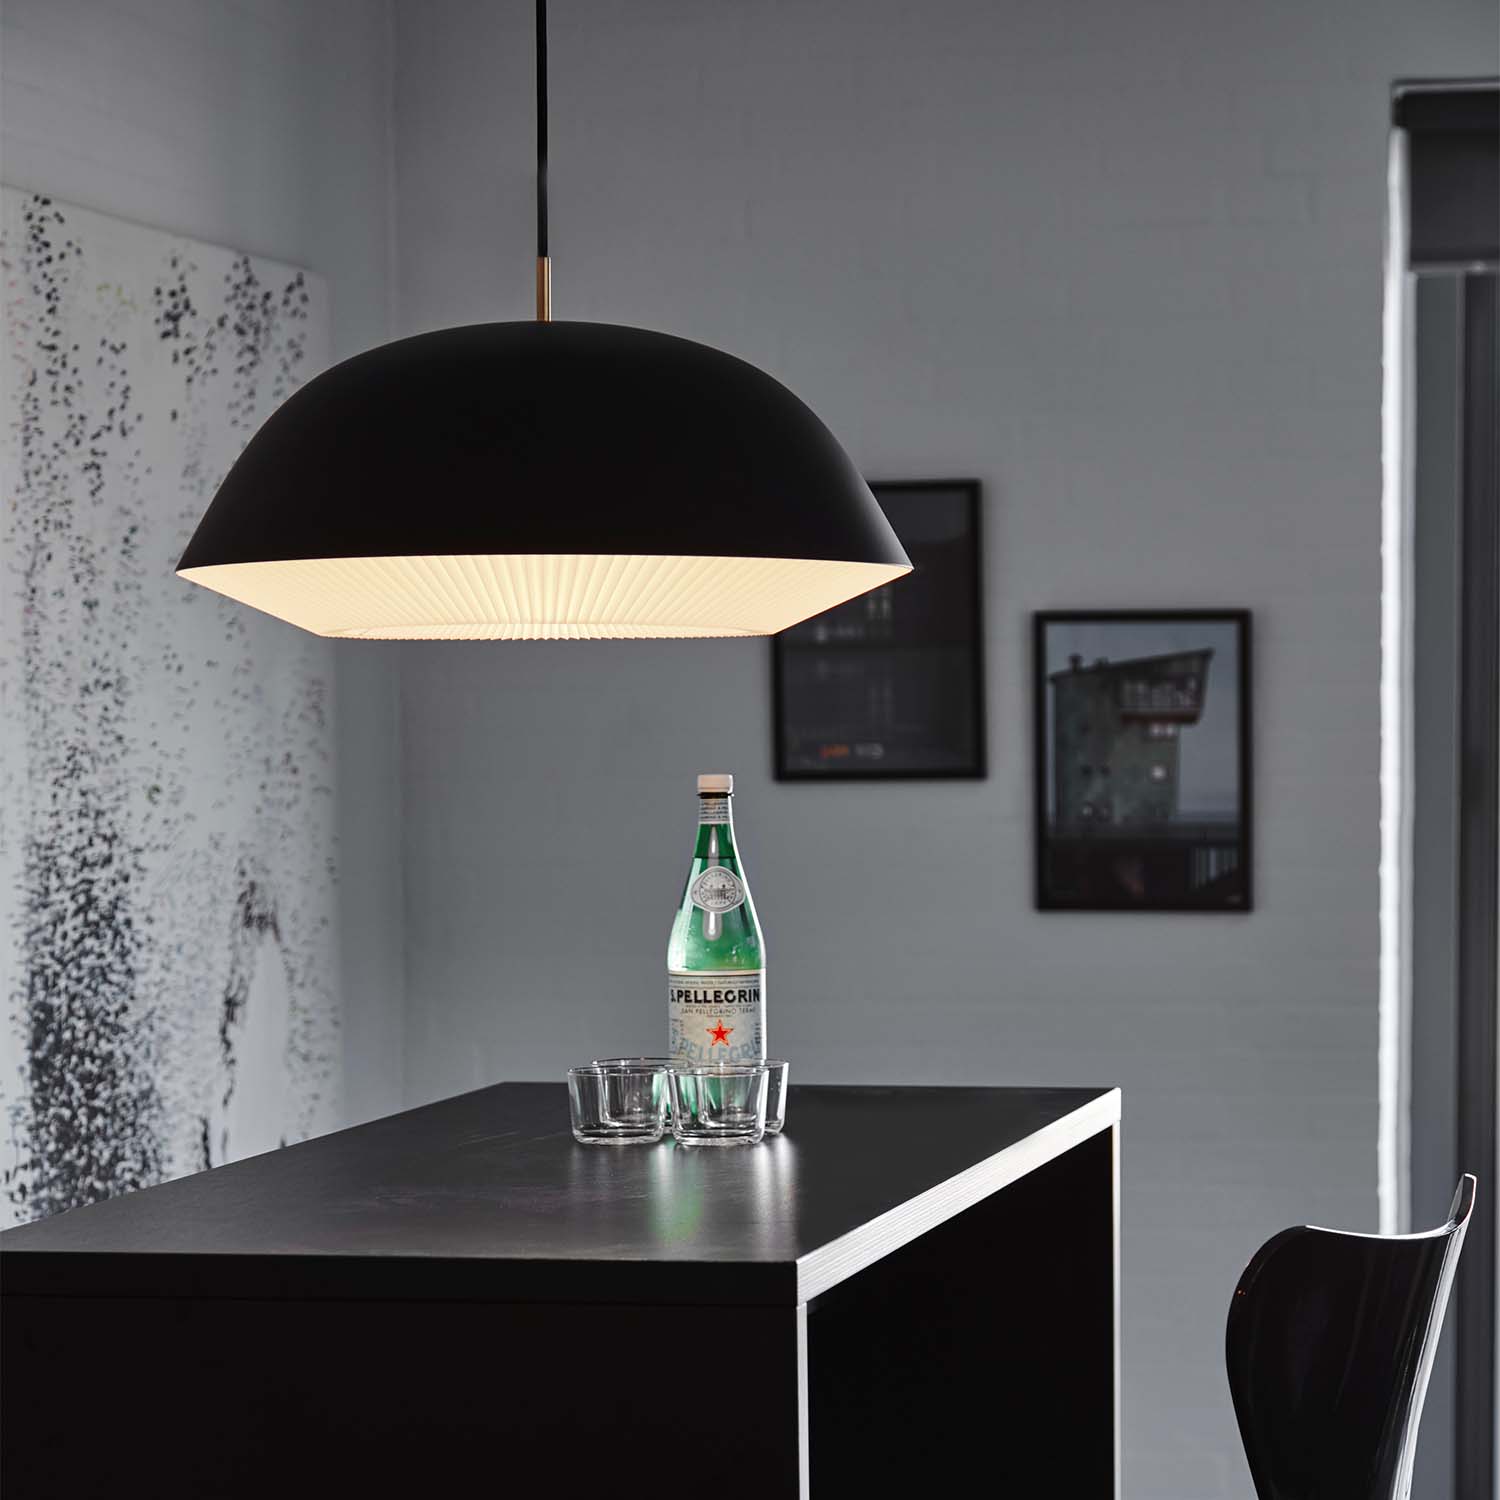 CACHÉ - Black pendant light with pleated paper dining room